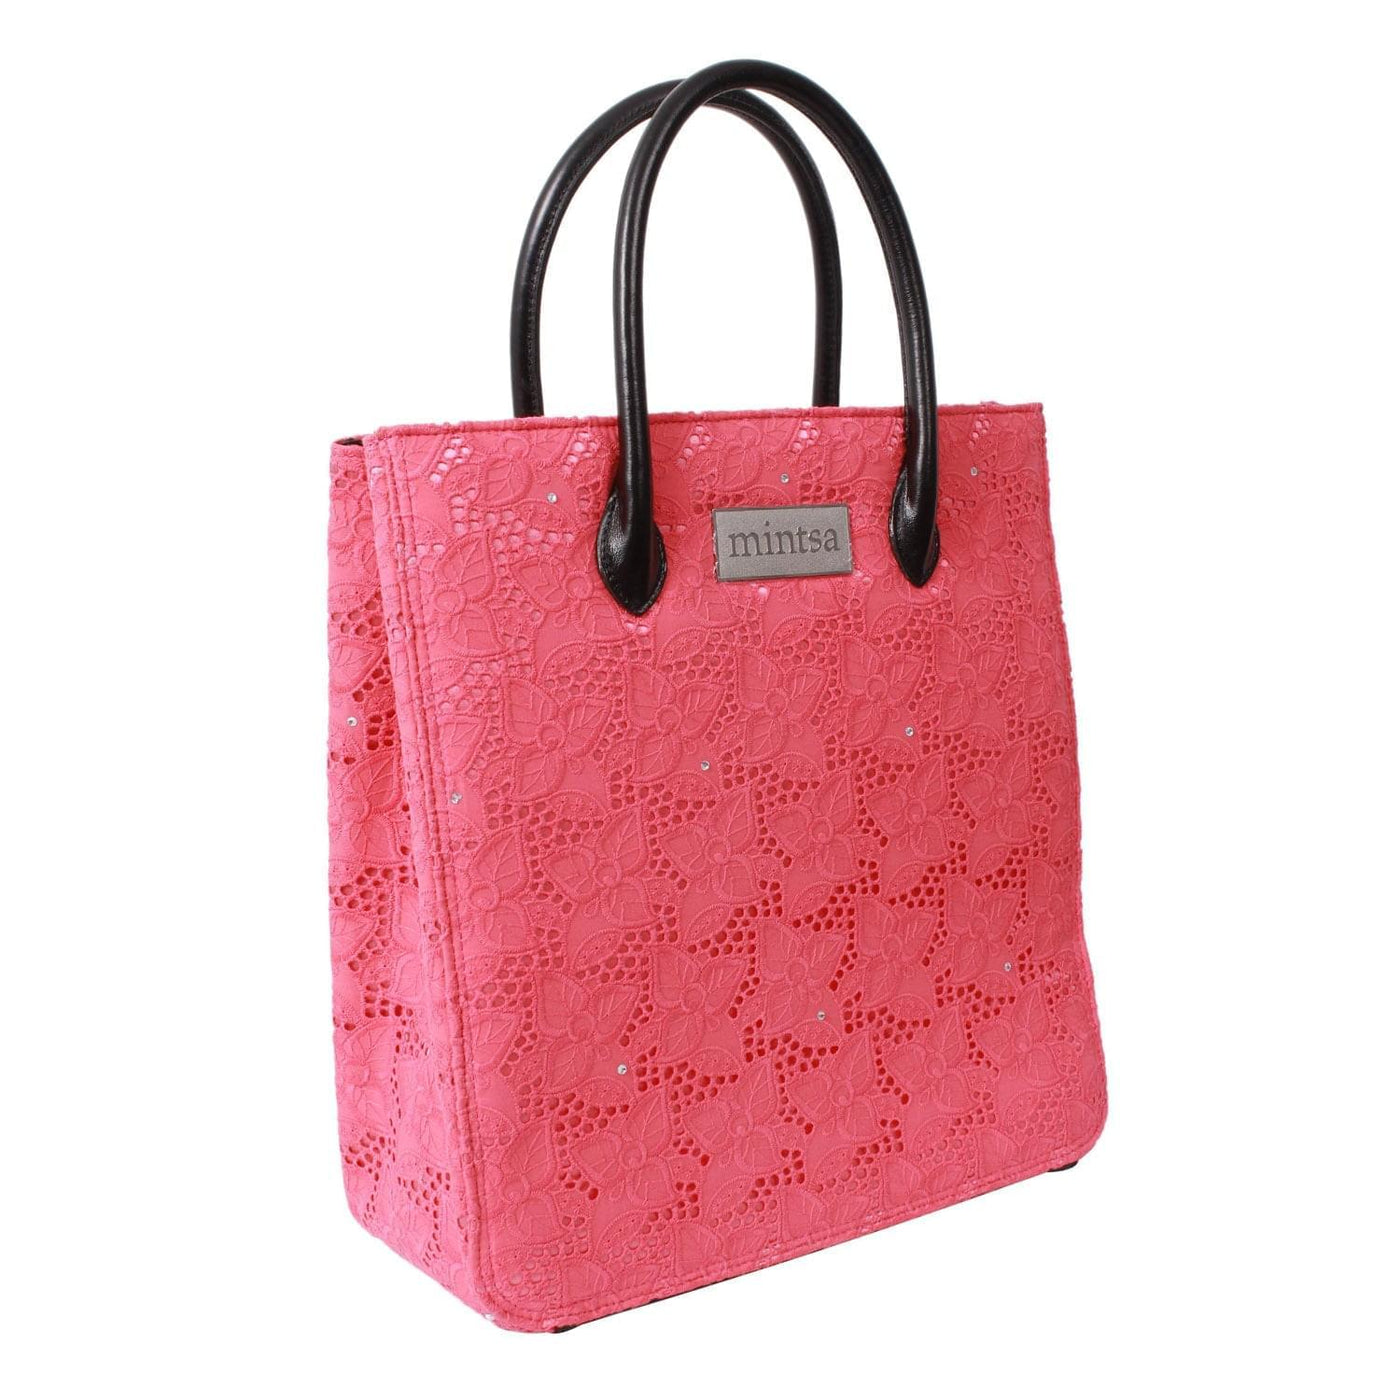 bSpecial Coral Tote - Women's tote bag for everyday use